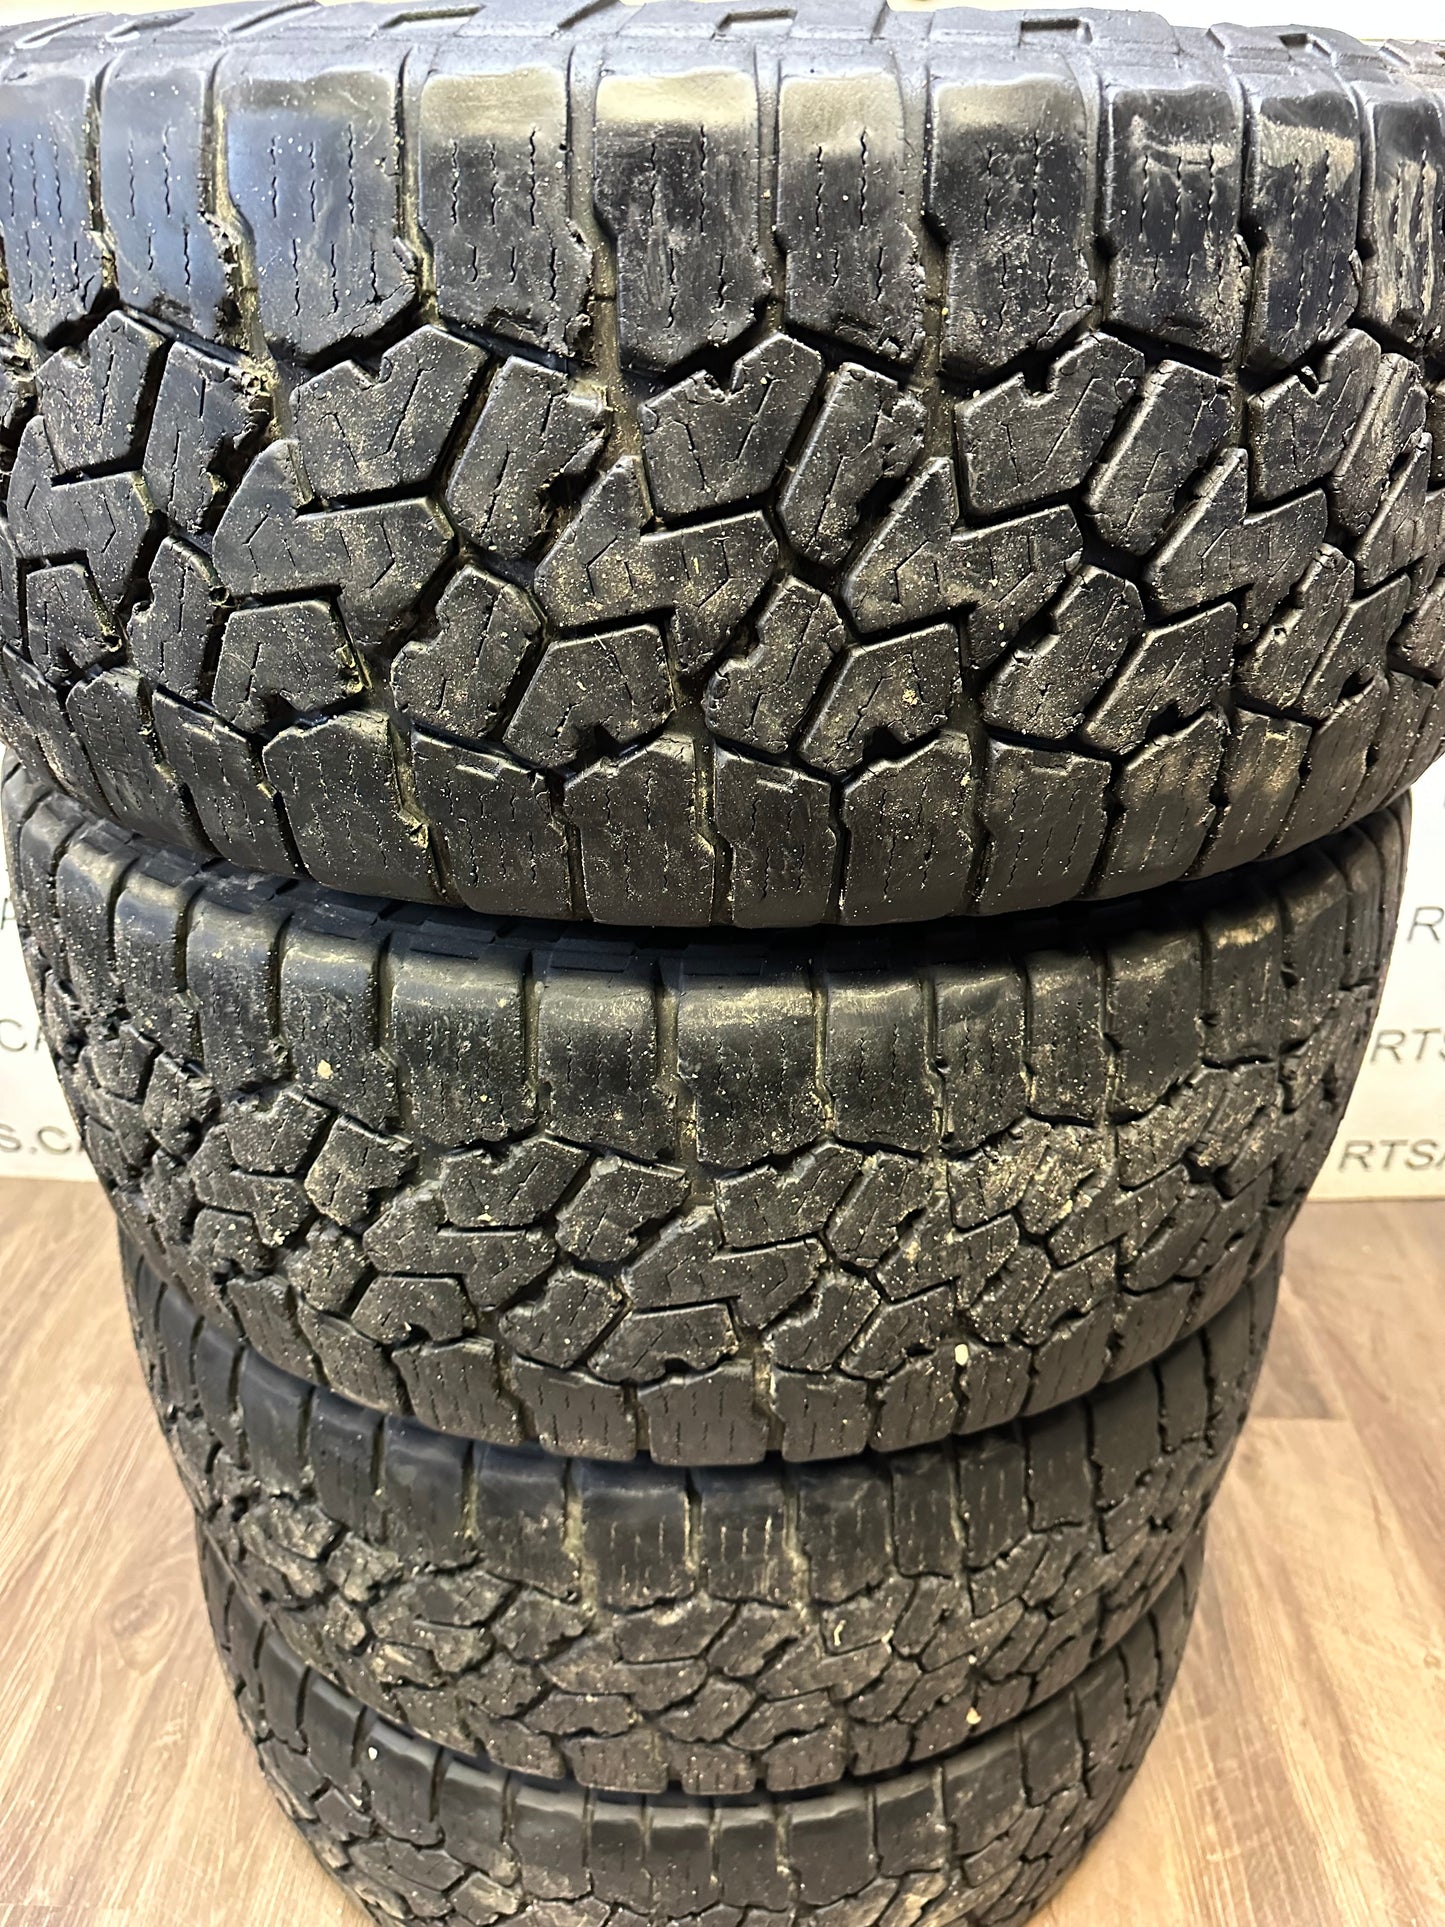 LT 285/60/20 Falken Wildpeak AT3W E All Weather Tires (Used)